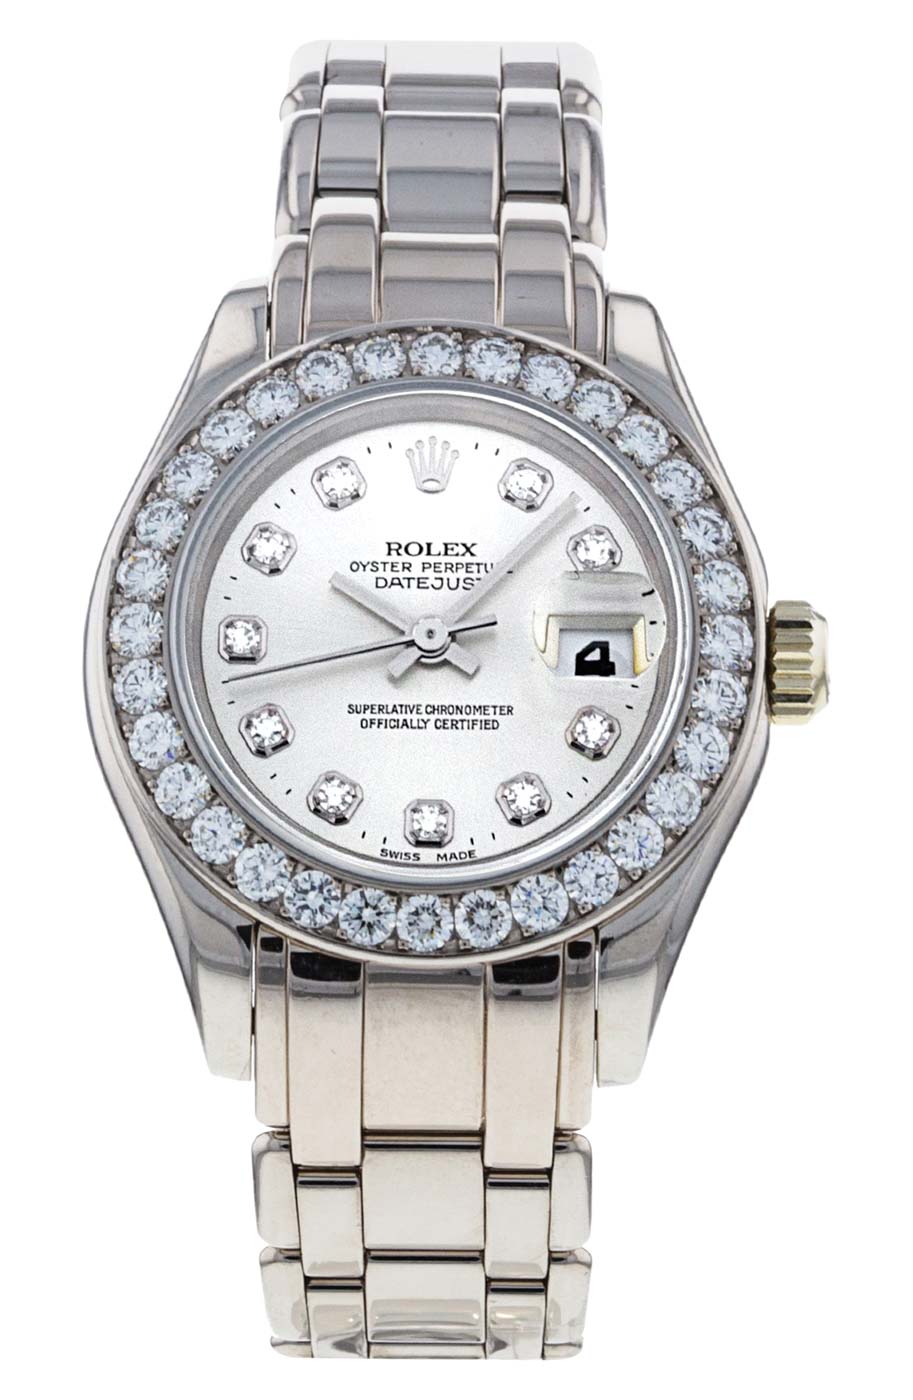 42 Watchfinder And Co, Rolex Preowned Pearlmaster Oyster Perpetual Bracelet Watch, 29mm White Gold Set With Diamonds, Nordstrom.com